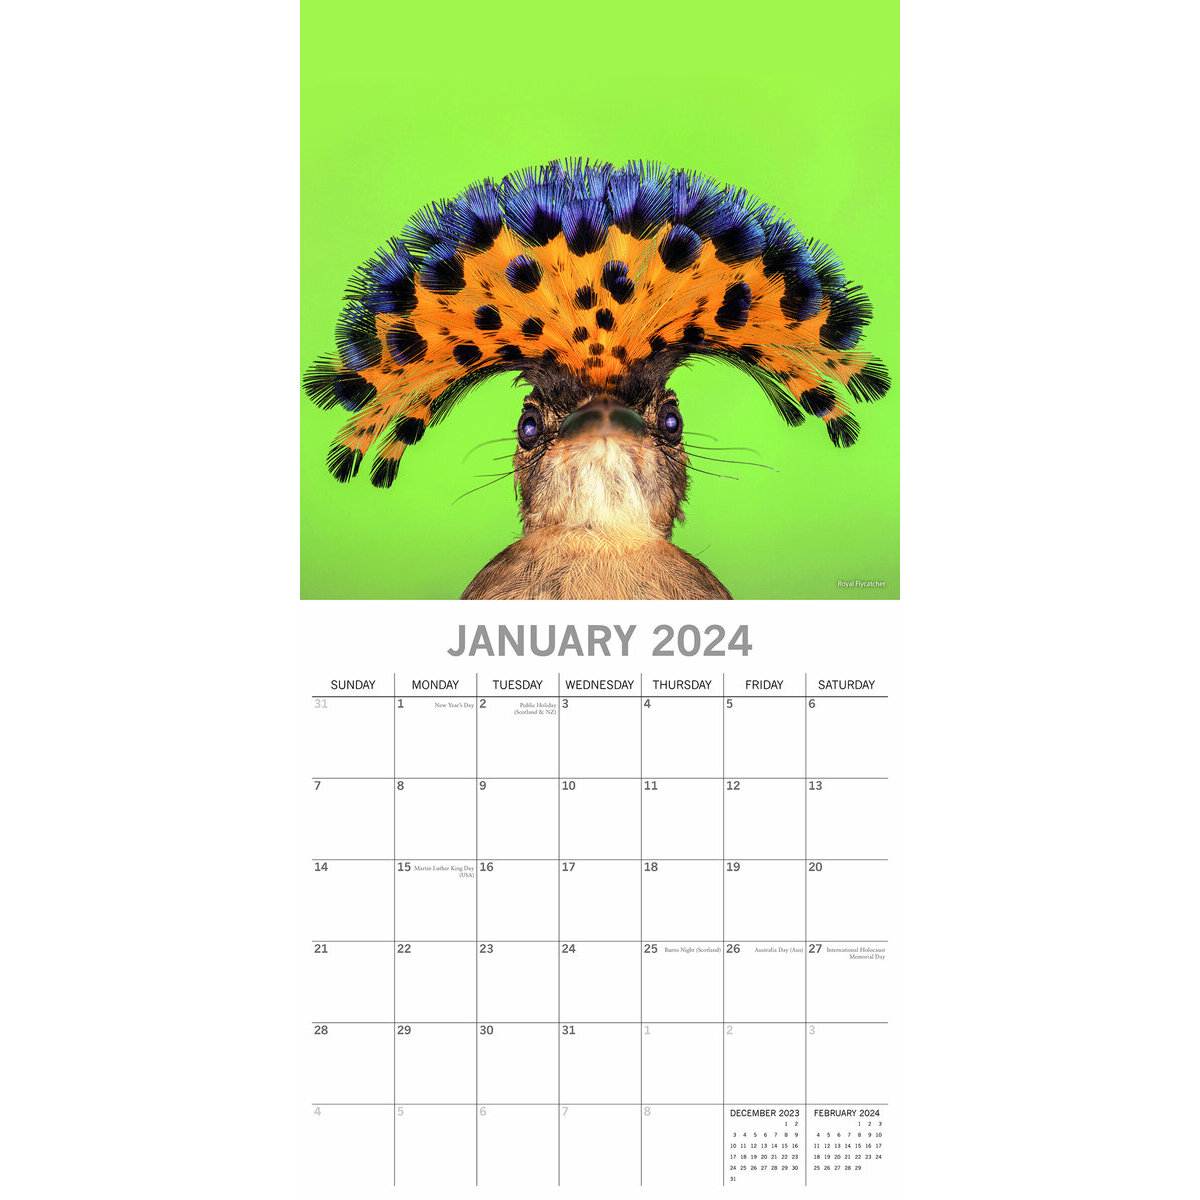 The Gifted Stationary Calendrier des oiseaux exotiques 2024